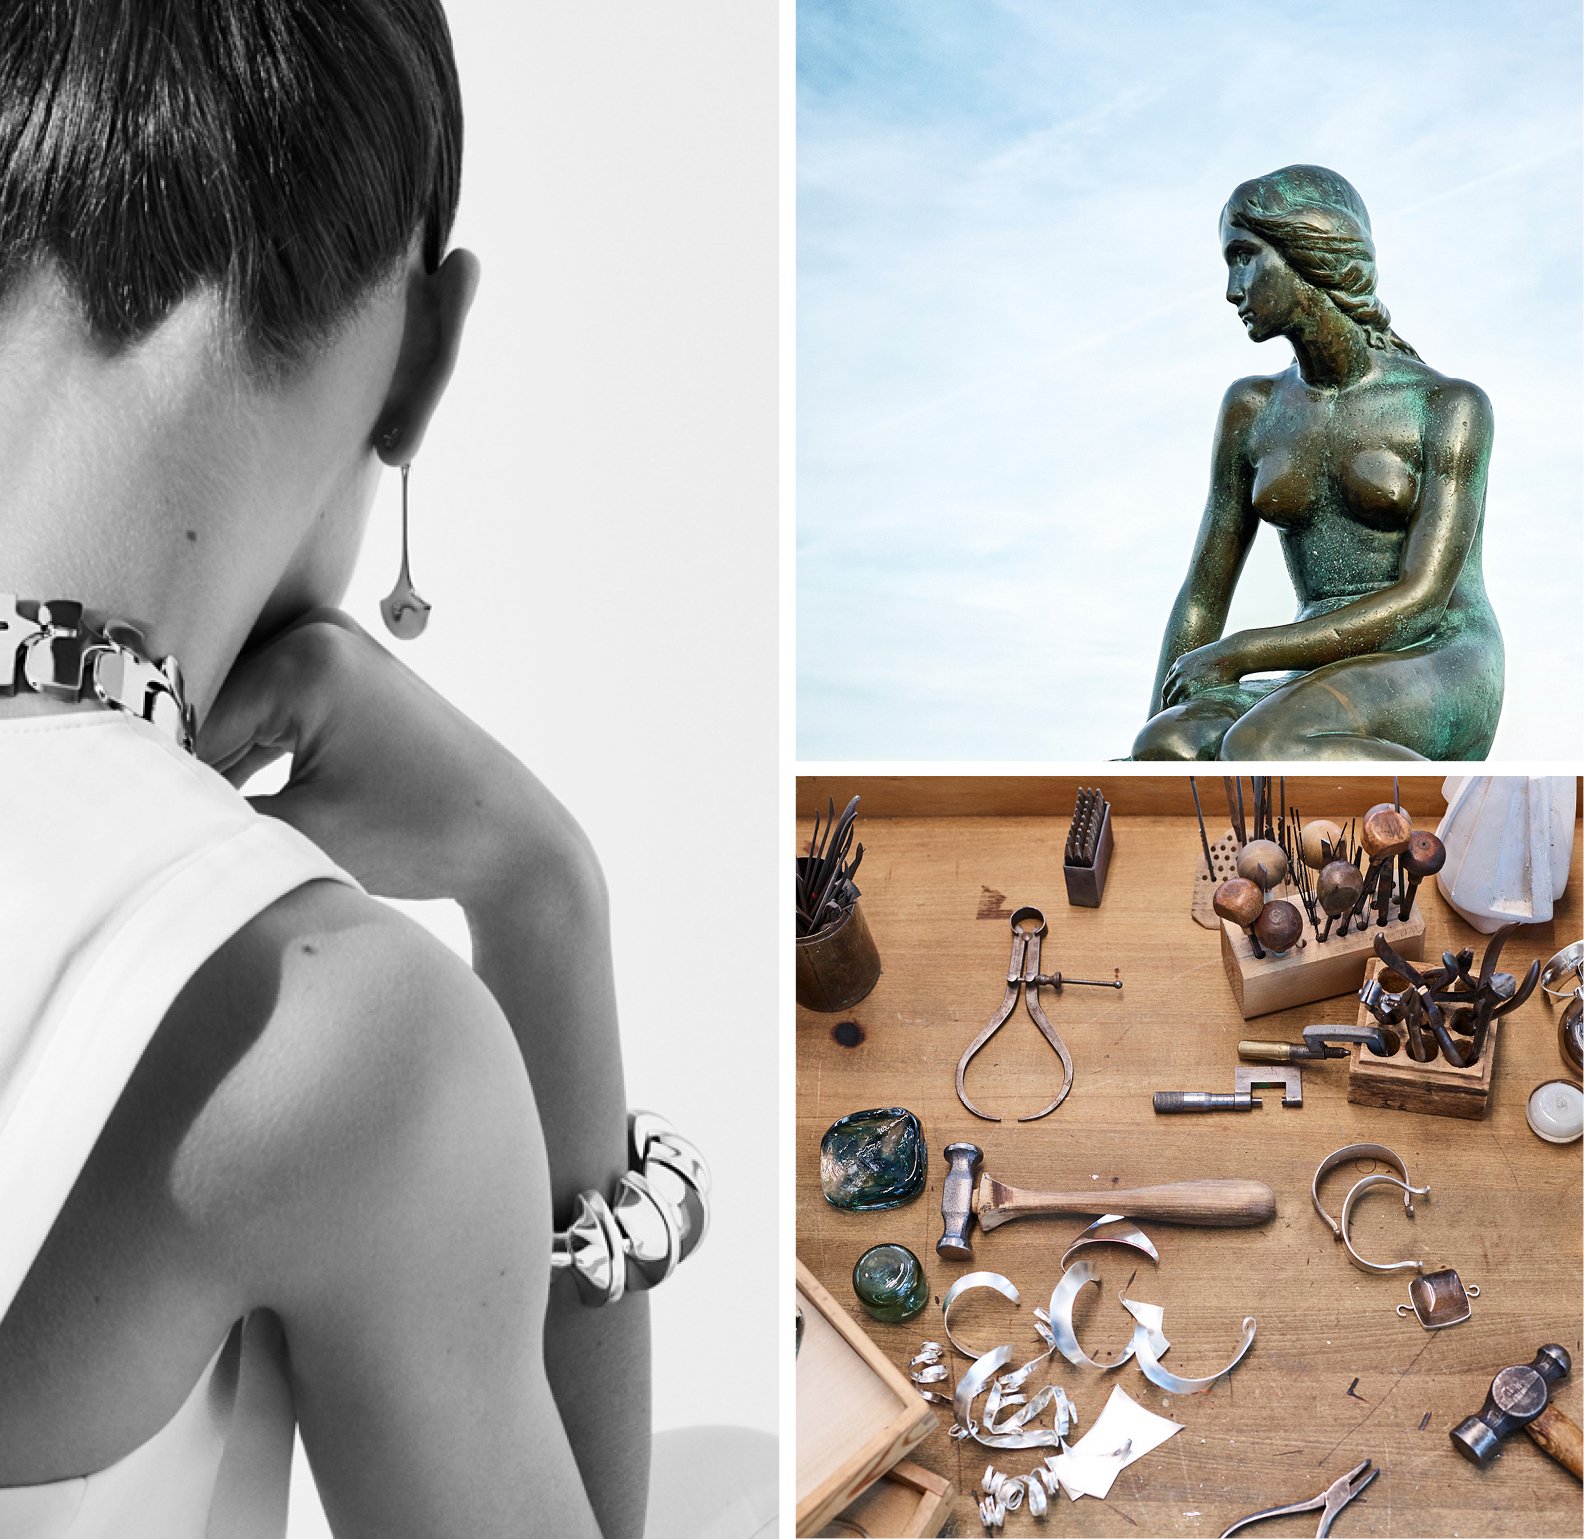 Chance to win a trip for two to Copenhagen with Georg Jensen